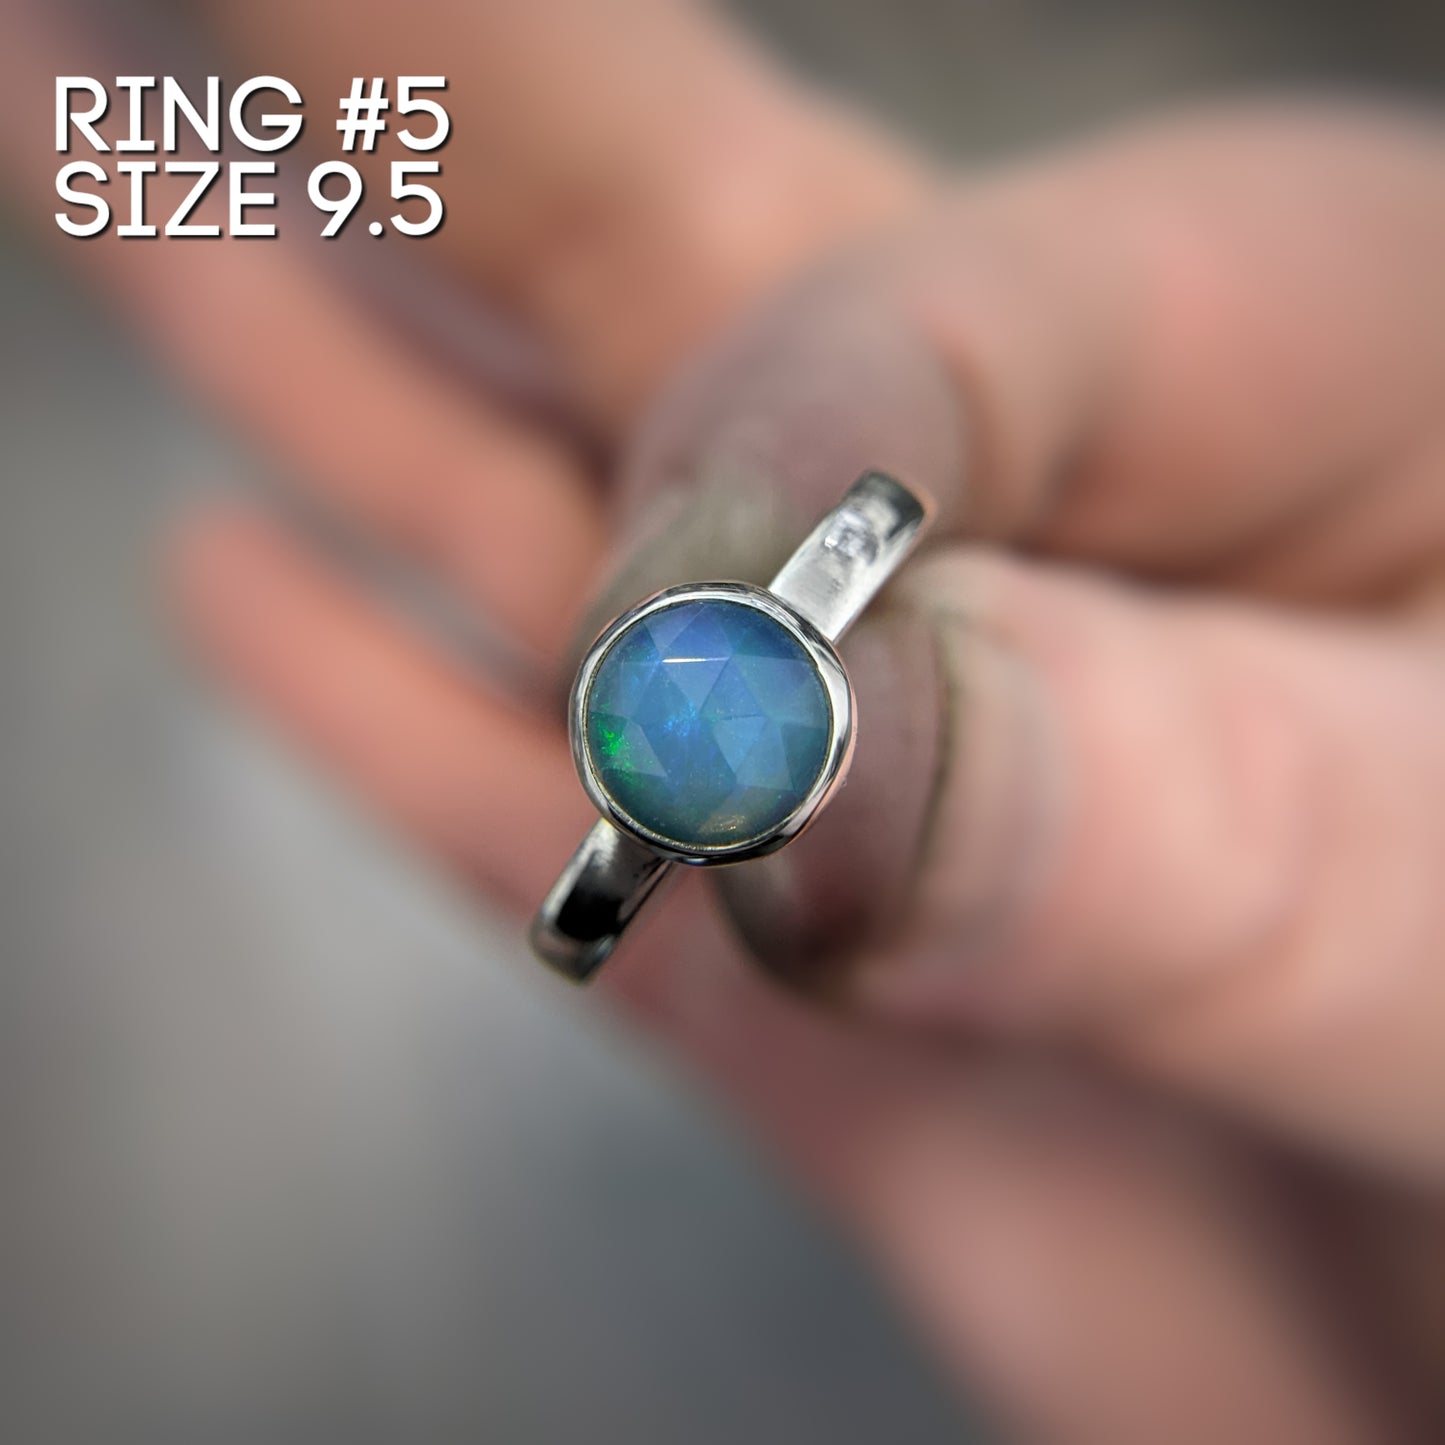 Freeform Ethiopian Opal Ring | With Engraving